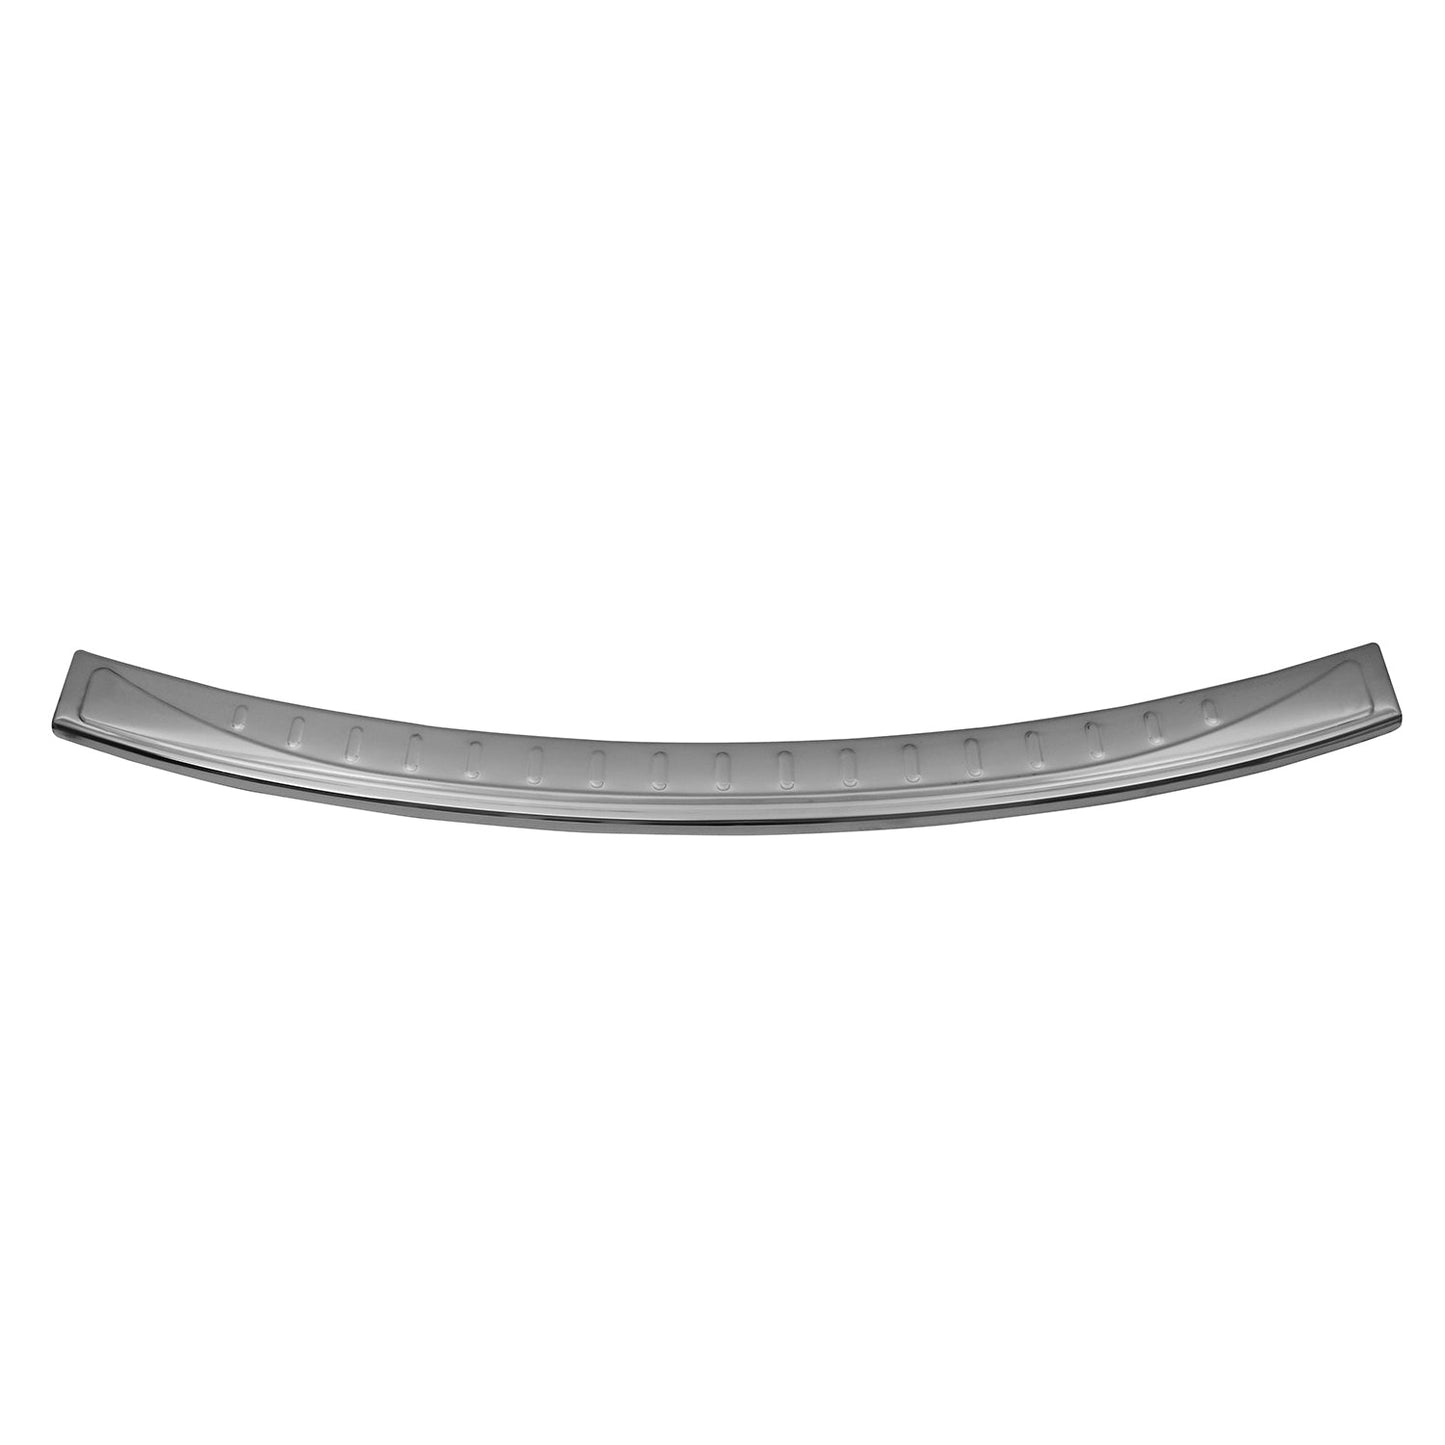 OMAC Rear Bumper Sill Cover Protector Guard for Mazda CX-5 2013-2016 Stainless Steel K-4621093